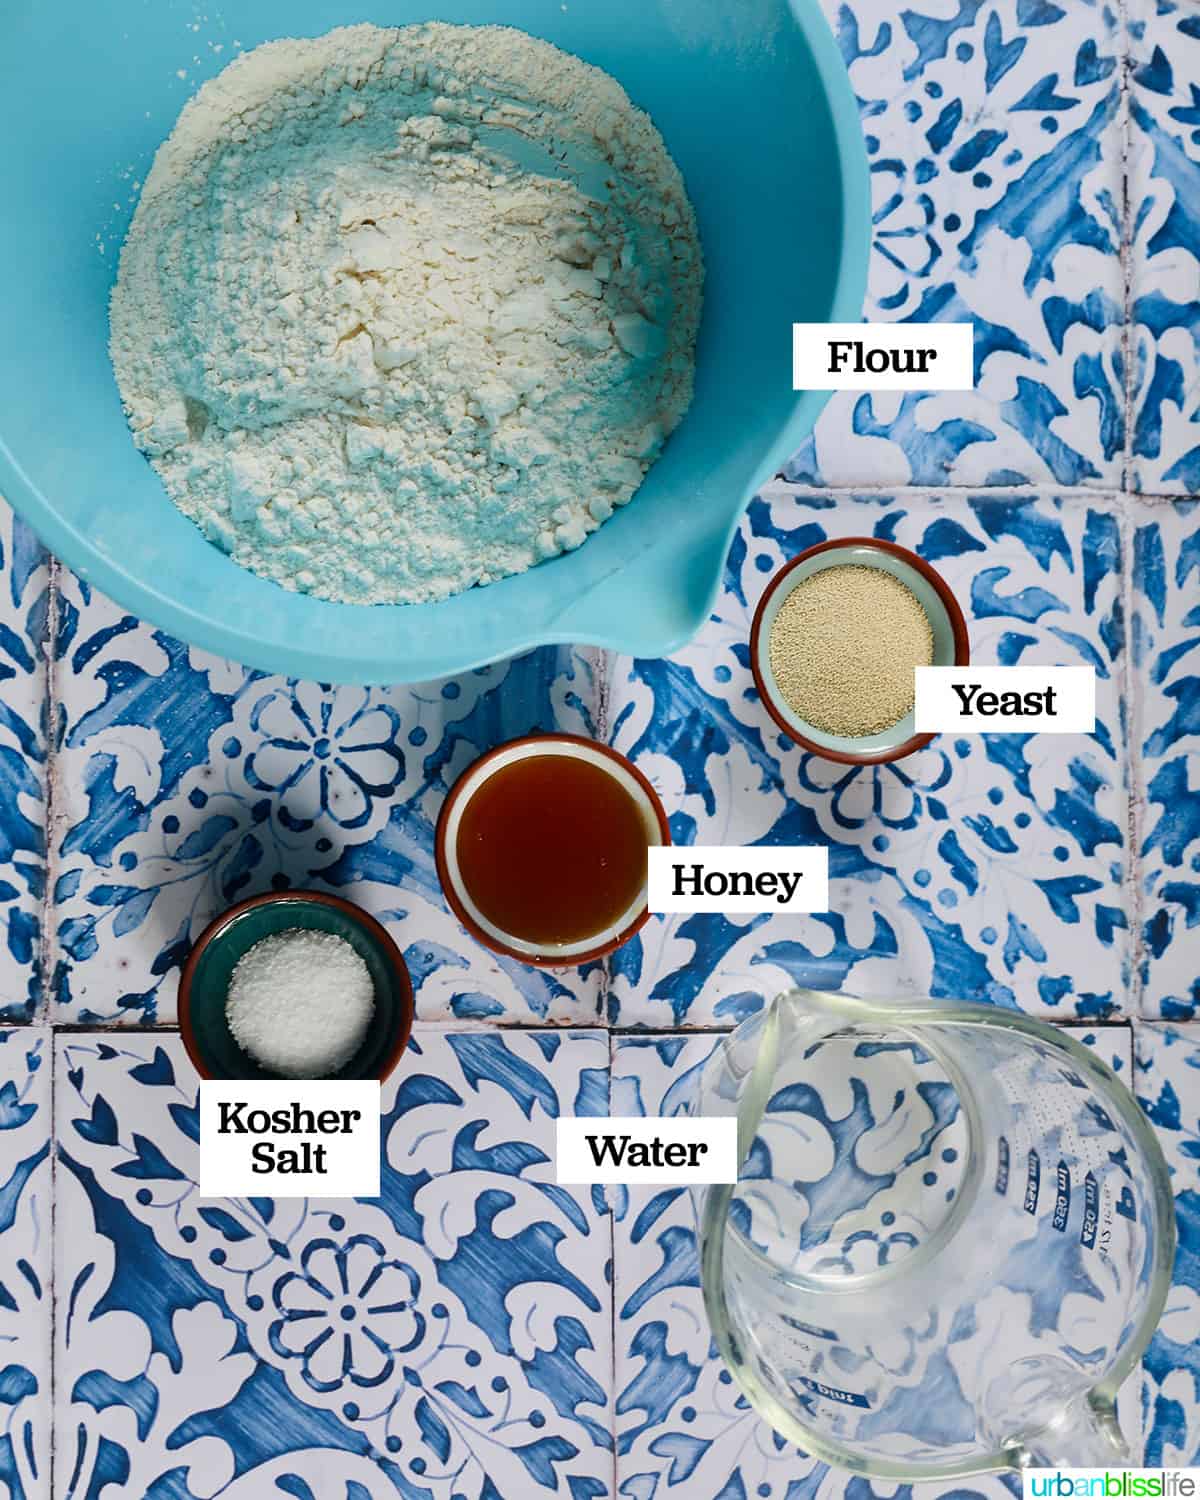 bowls of ingredients to make homemade french bread on a blue and white tiled table.